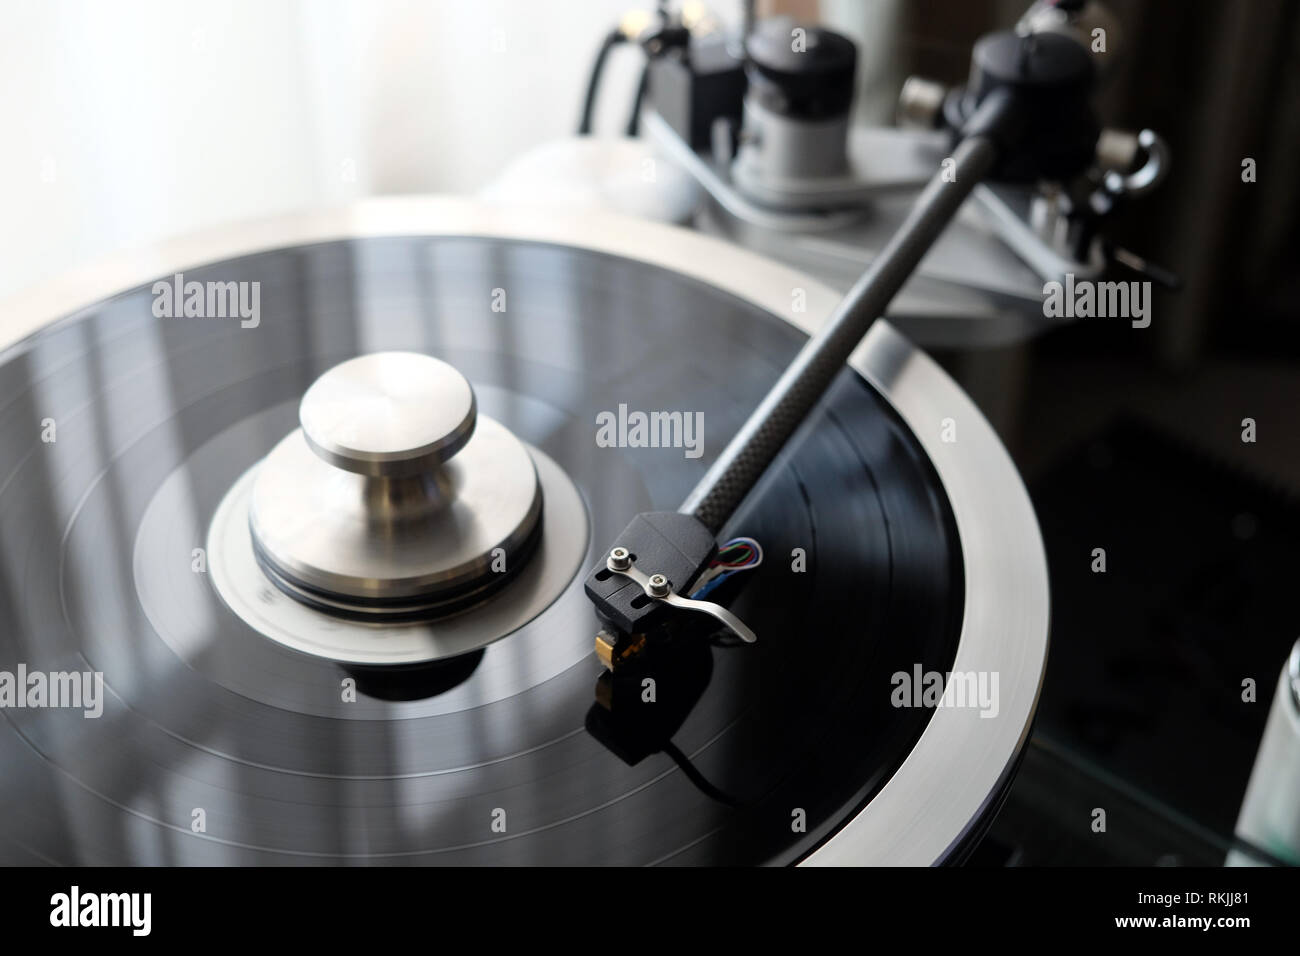 Graphite tonearm of vintage turntable with LP record close up view Stock Photo